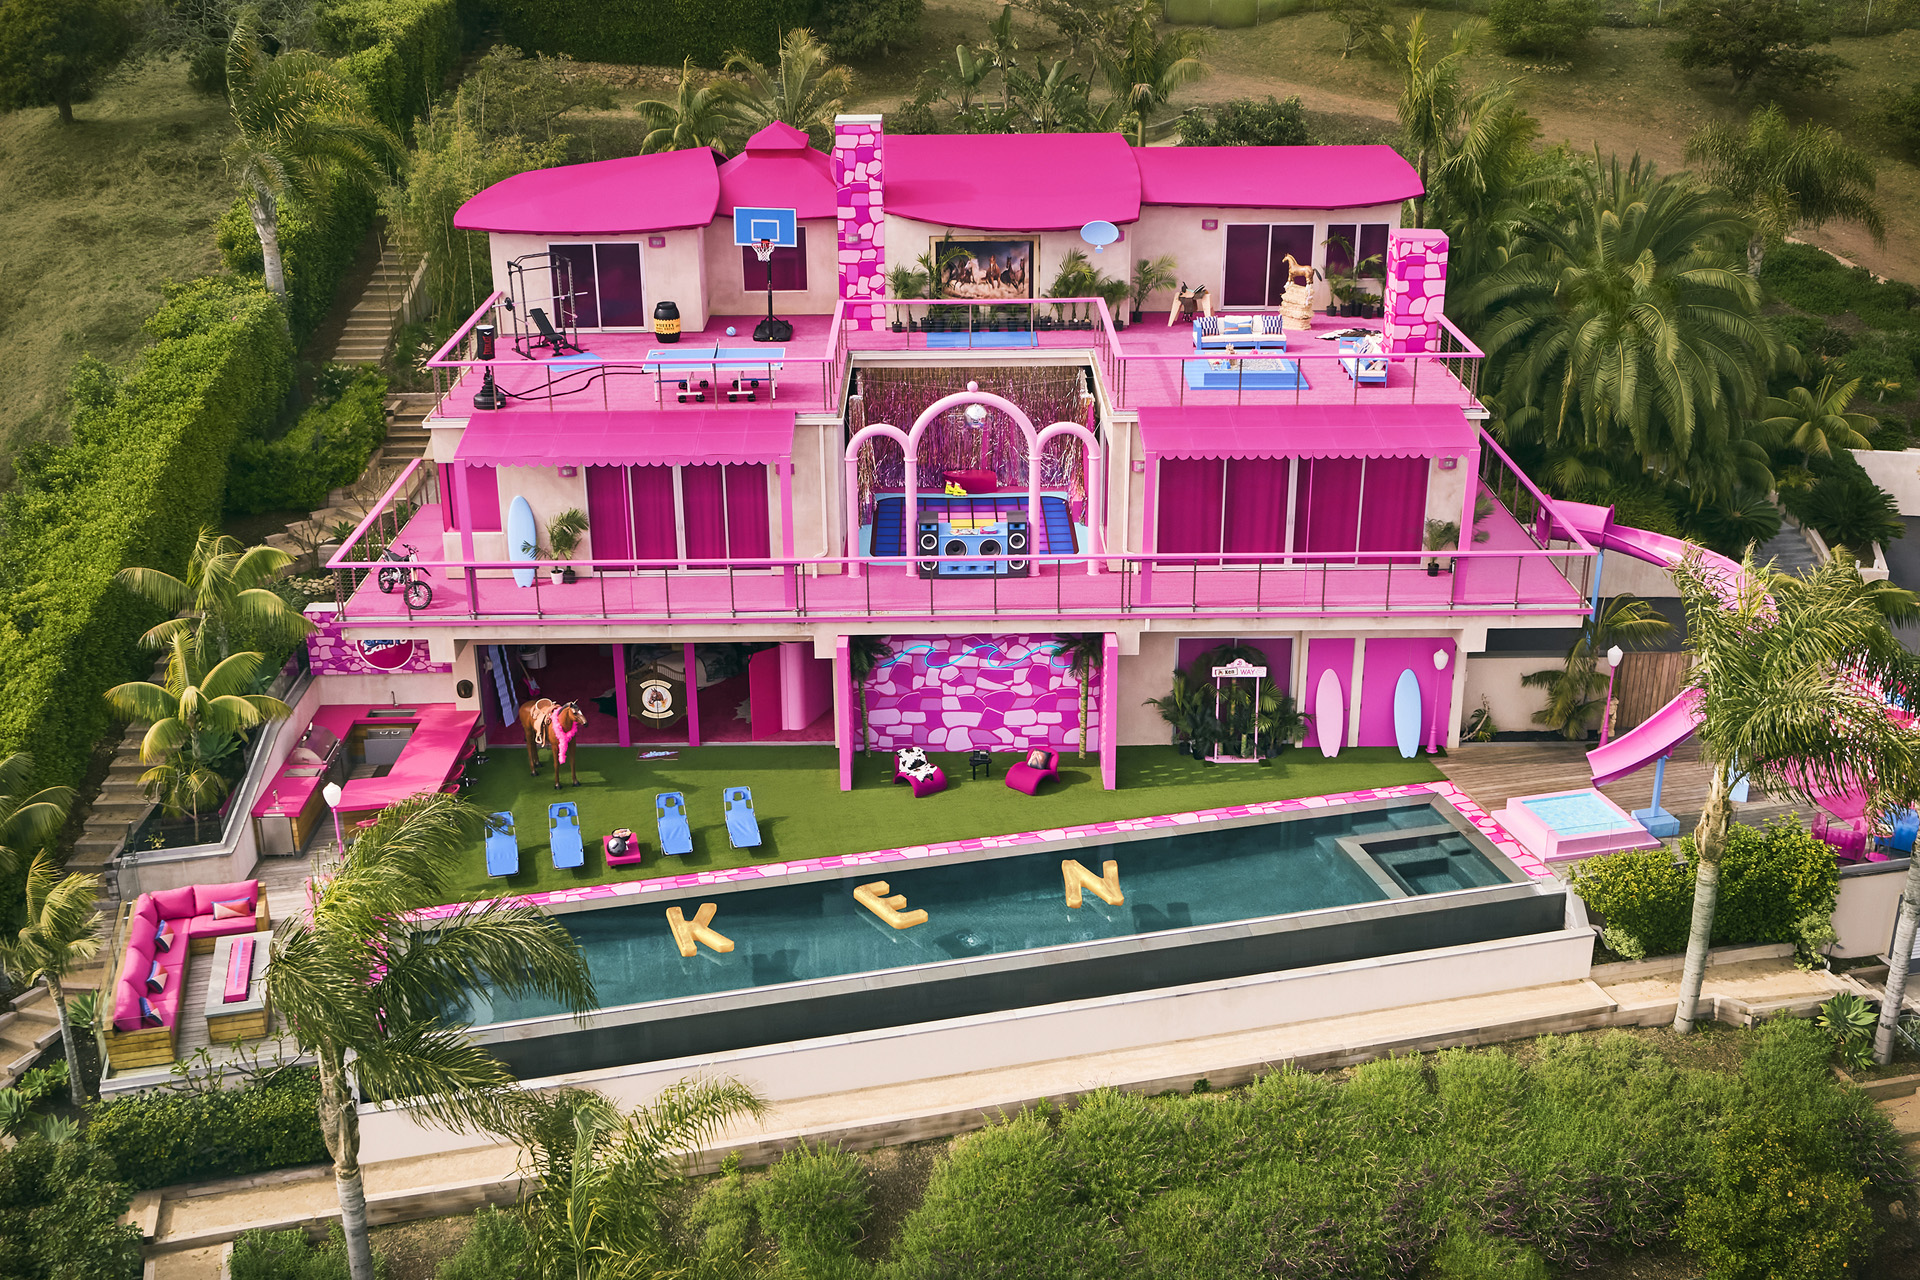 Here’s How To Stay In Barbie’s Malibu DreamHouse